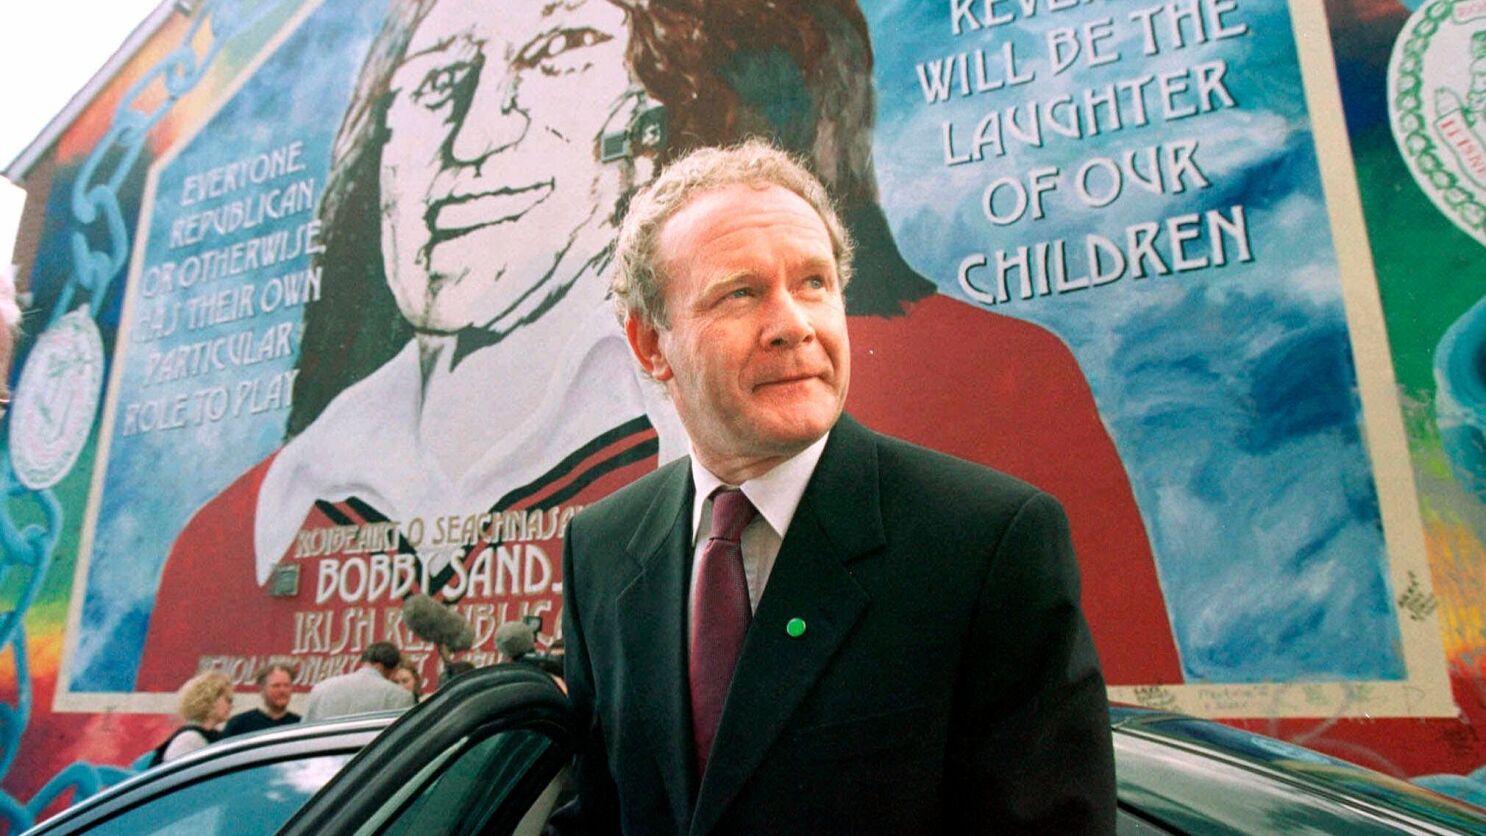 Martin McGuinness, ruthless IRA commander who traded his weapons for peace, at 66 - Los Angeles Times